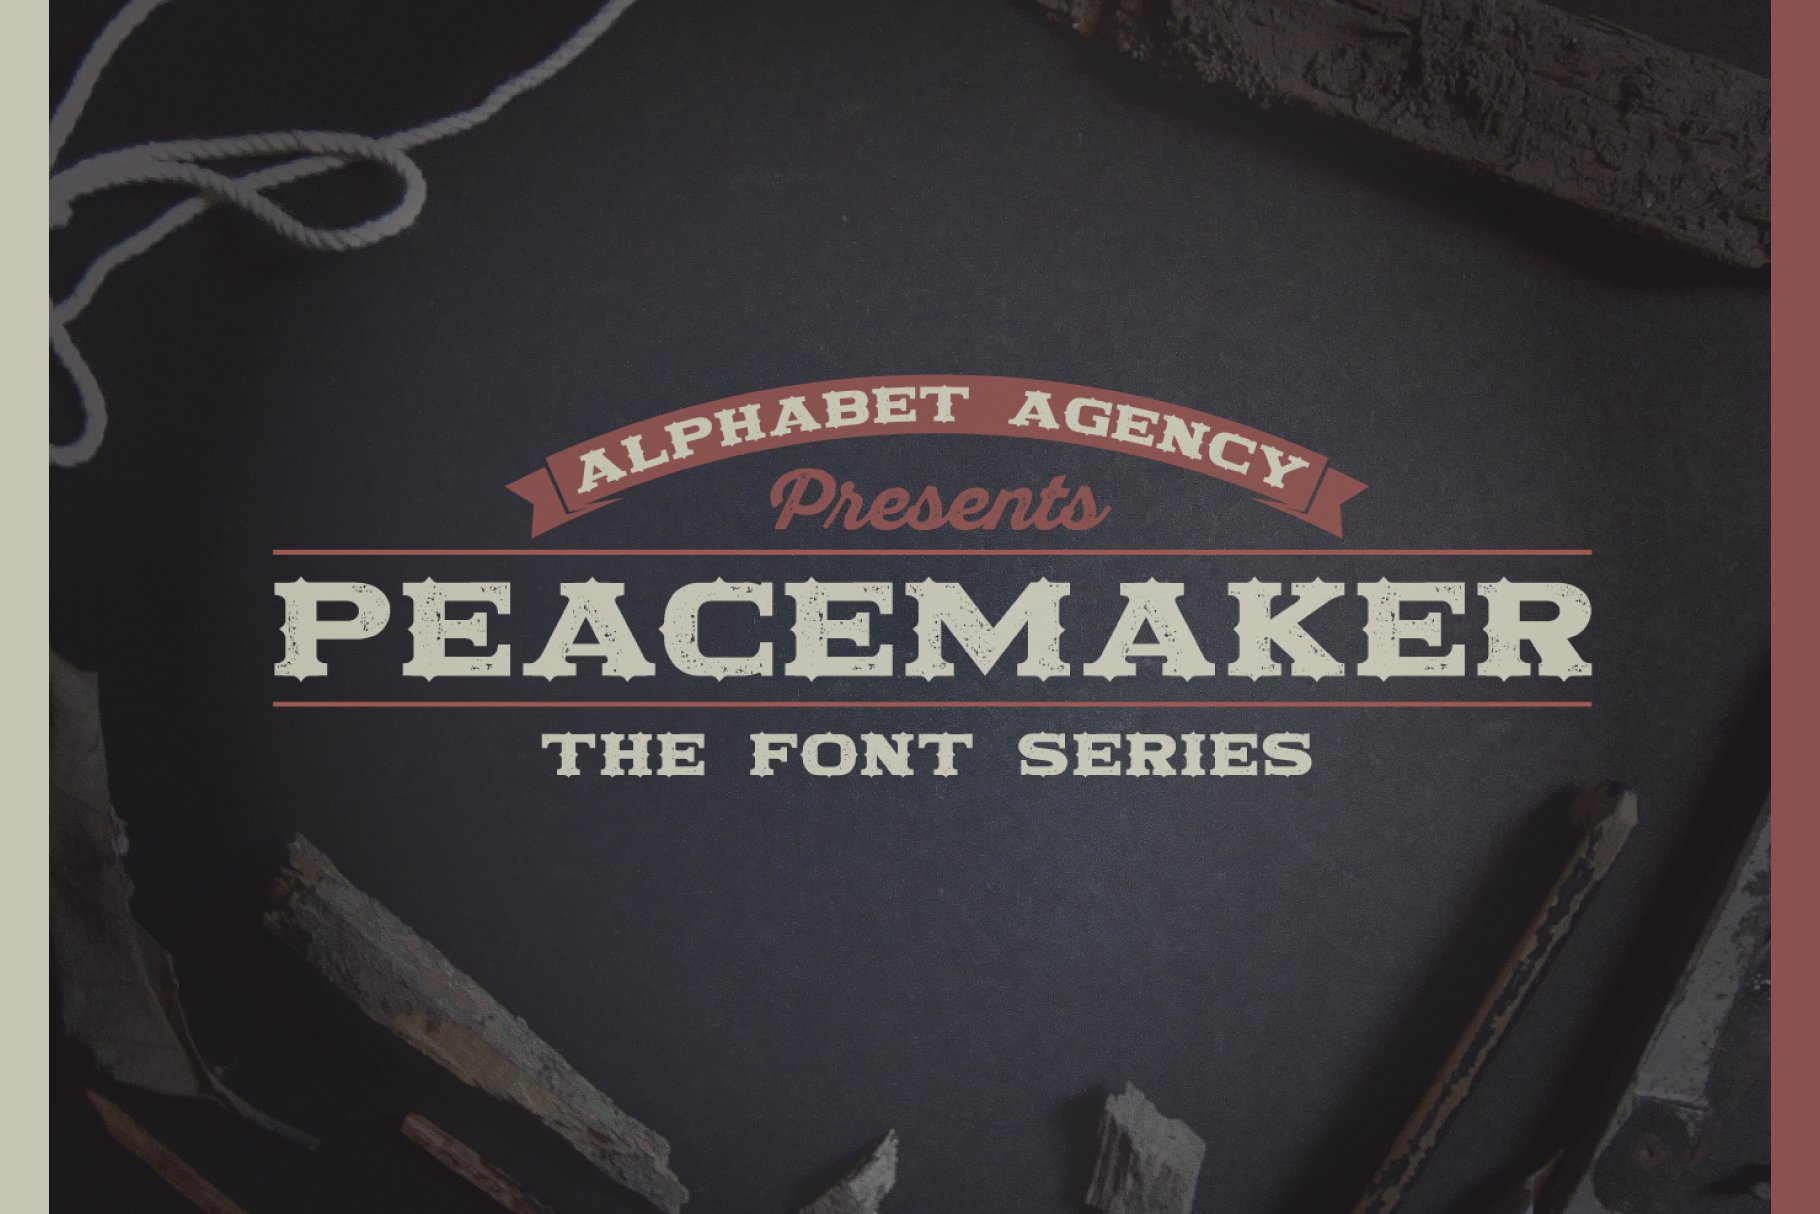 PEACEMAKER FONT SERIES cover image.